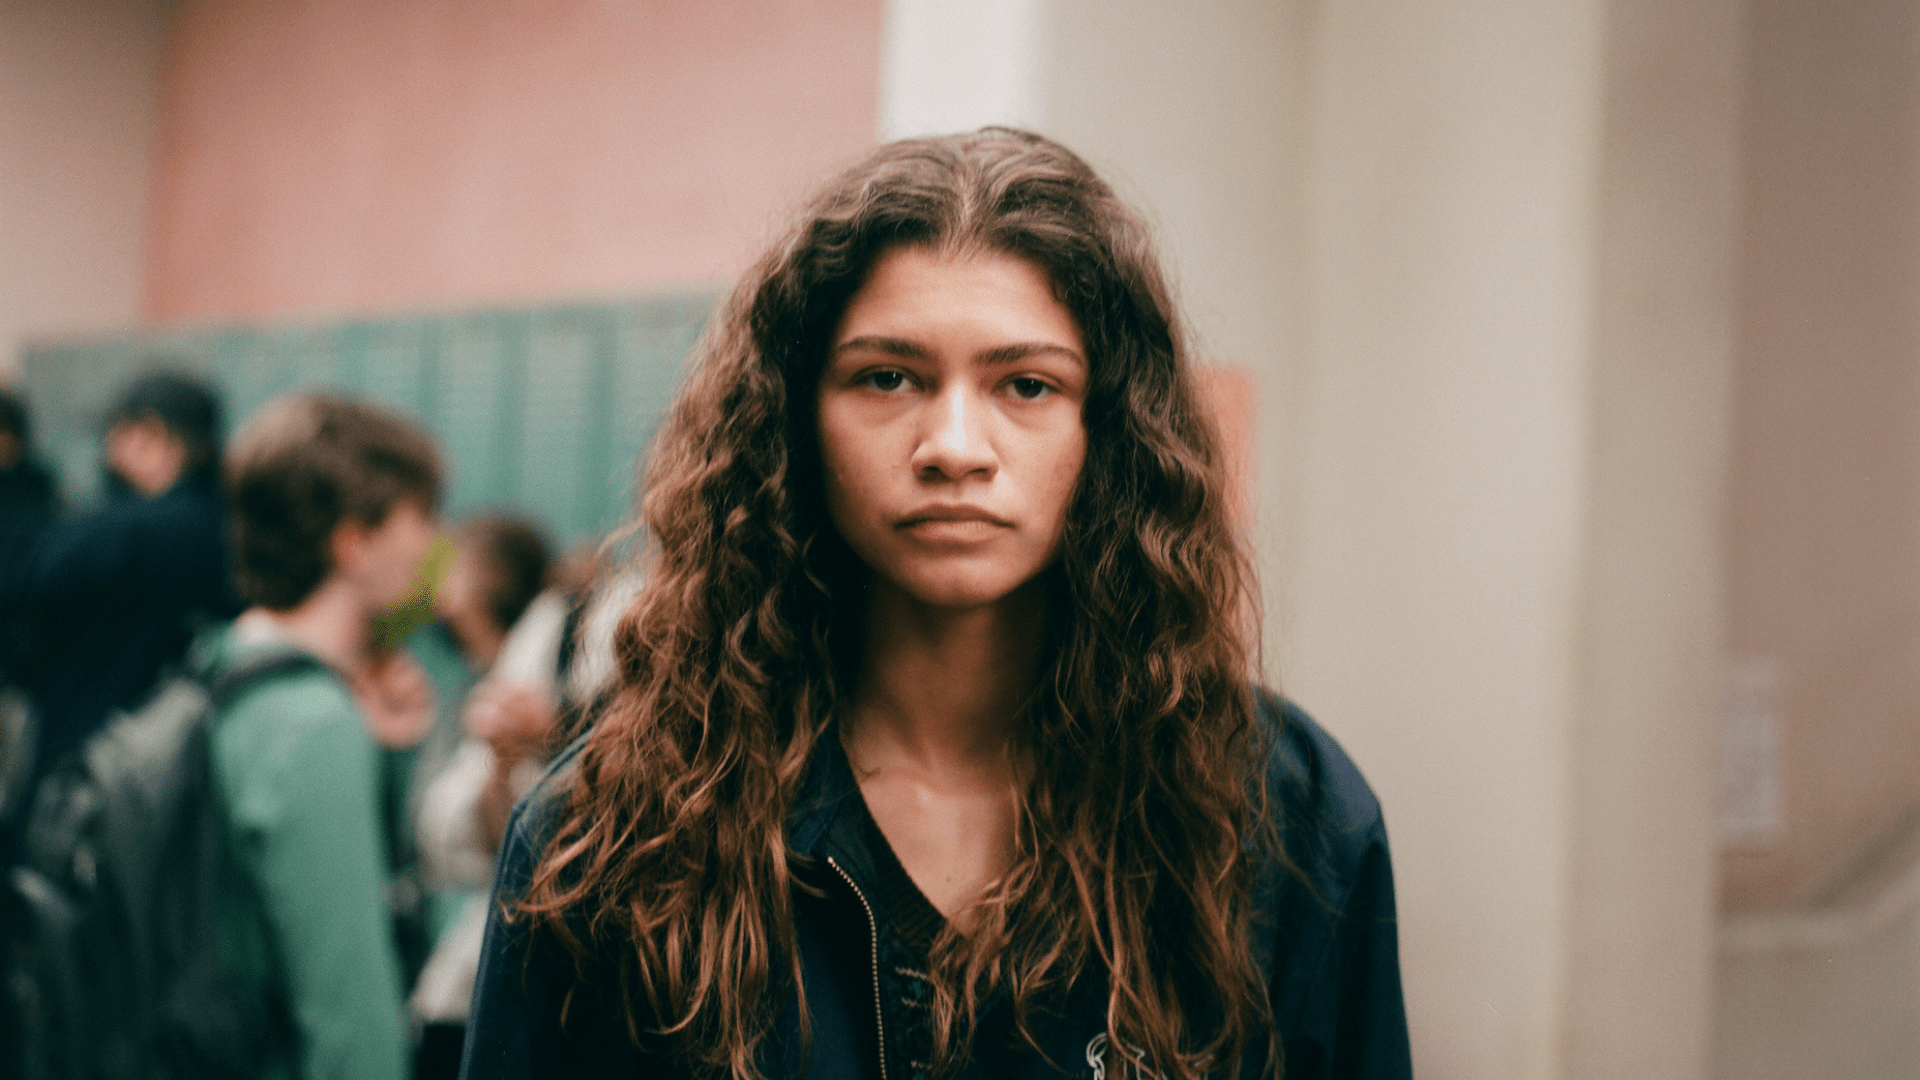 A girl with long curly brown hair looks directly at the camera. - Zendaya